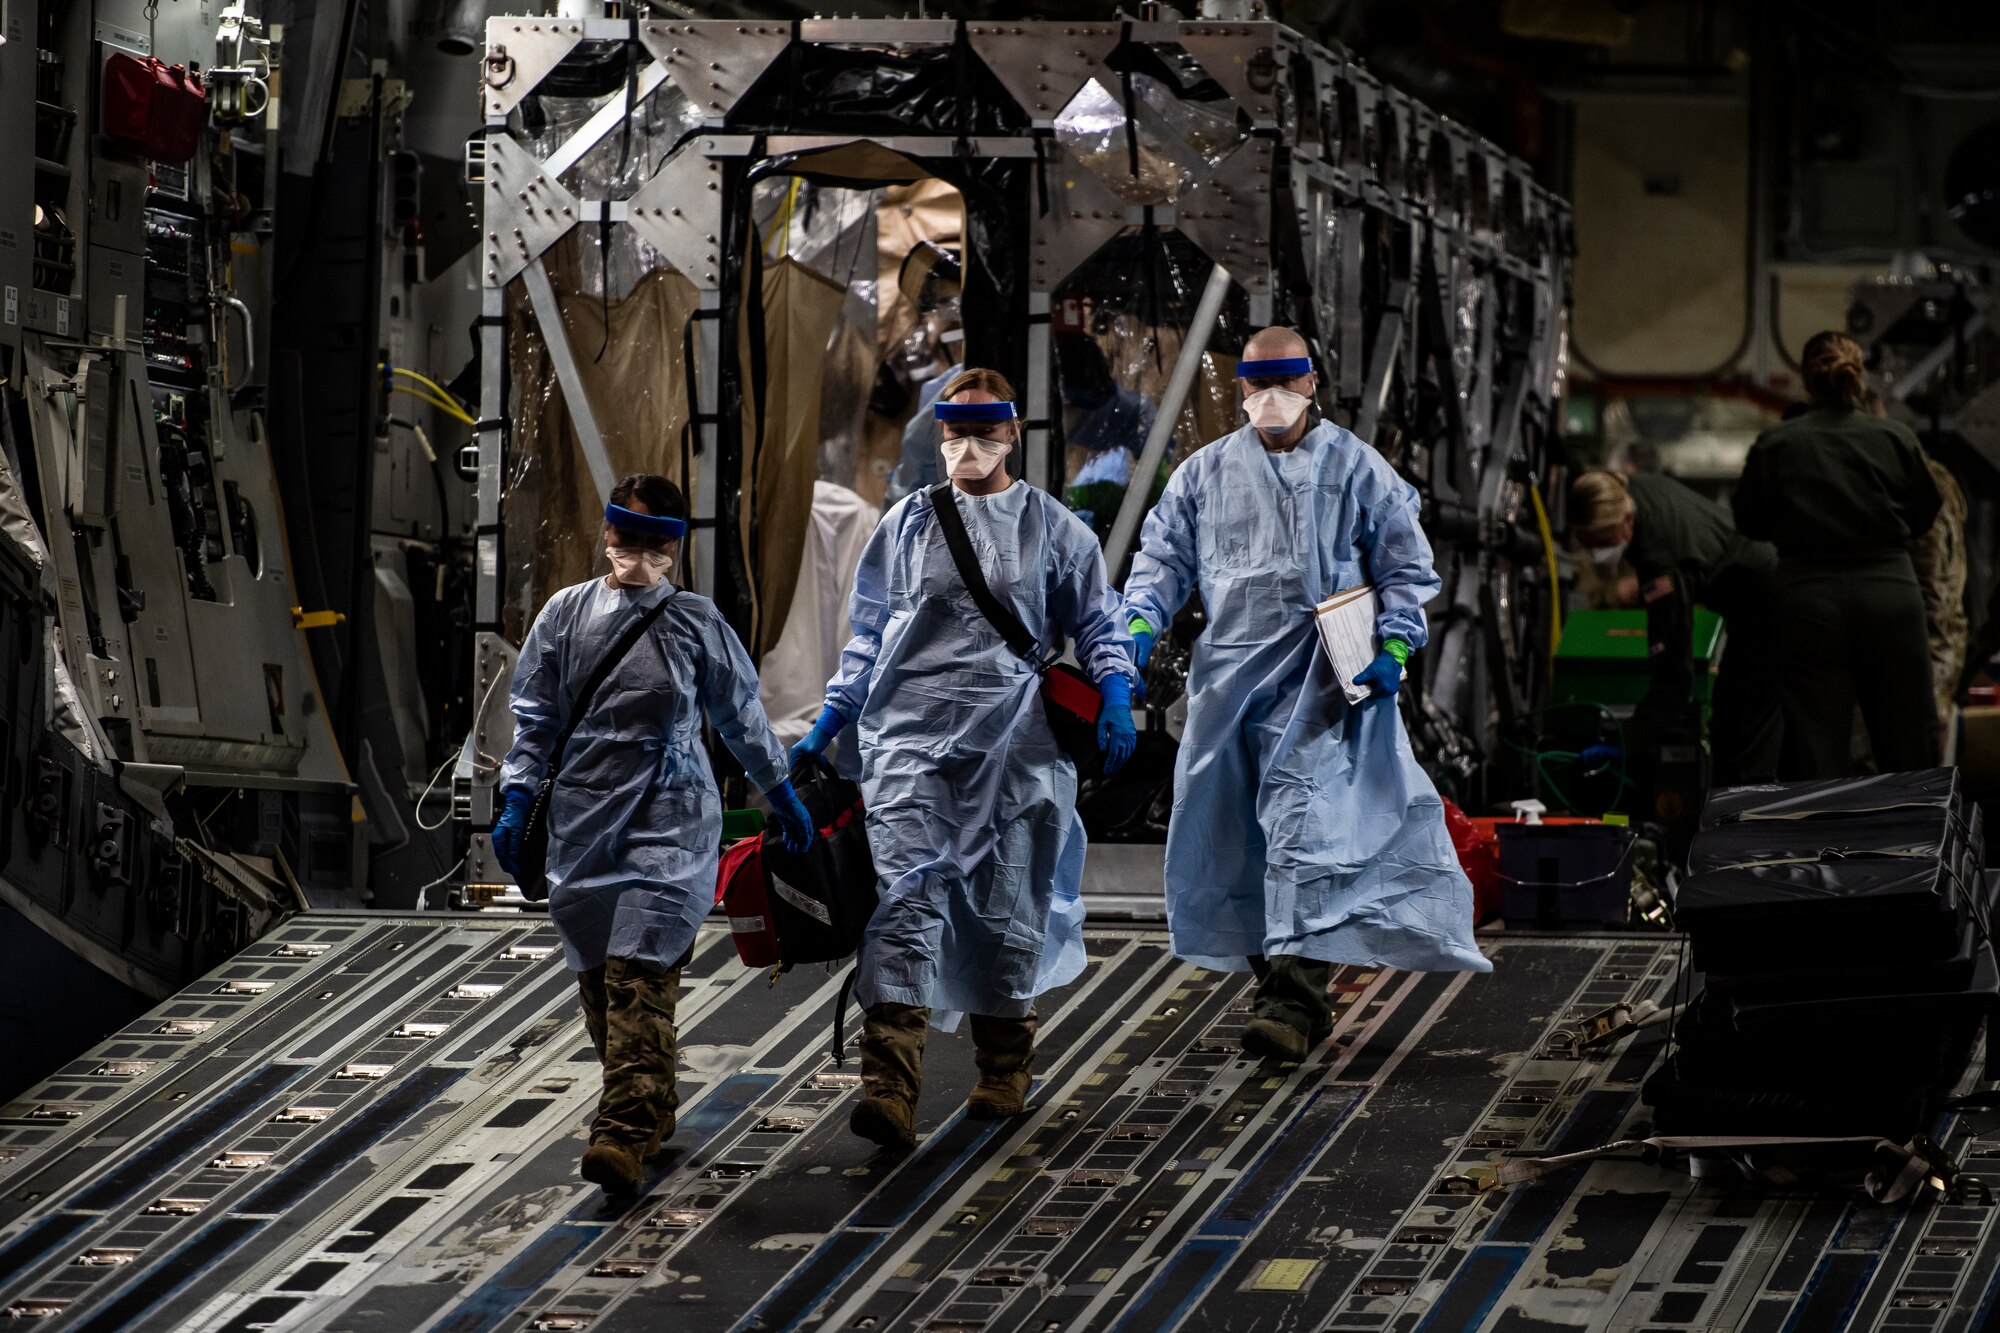 Three U.S. Air Force medical Airmen exit a C-17 Globemaster III aircraft following the first-ever operational use of the Transport Isolation System at Ramstein Air Base, Germany, April 10, 2020. The TIS is an infectious disease containment unit designed to minimize contamination risk to aircrew and medical attendants, while allowing in-flight medical care for patients afflicted by a disease--in this case, COVID-19. (U.S. Air Force photo by Staff Sgt. Devin Nothstine)